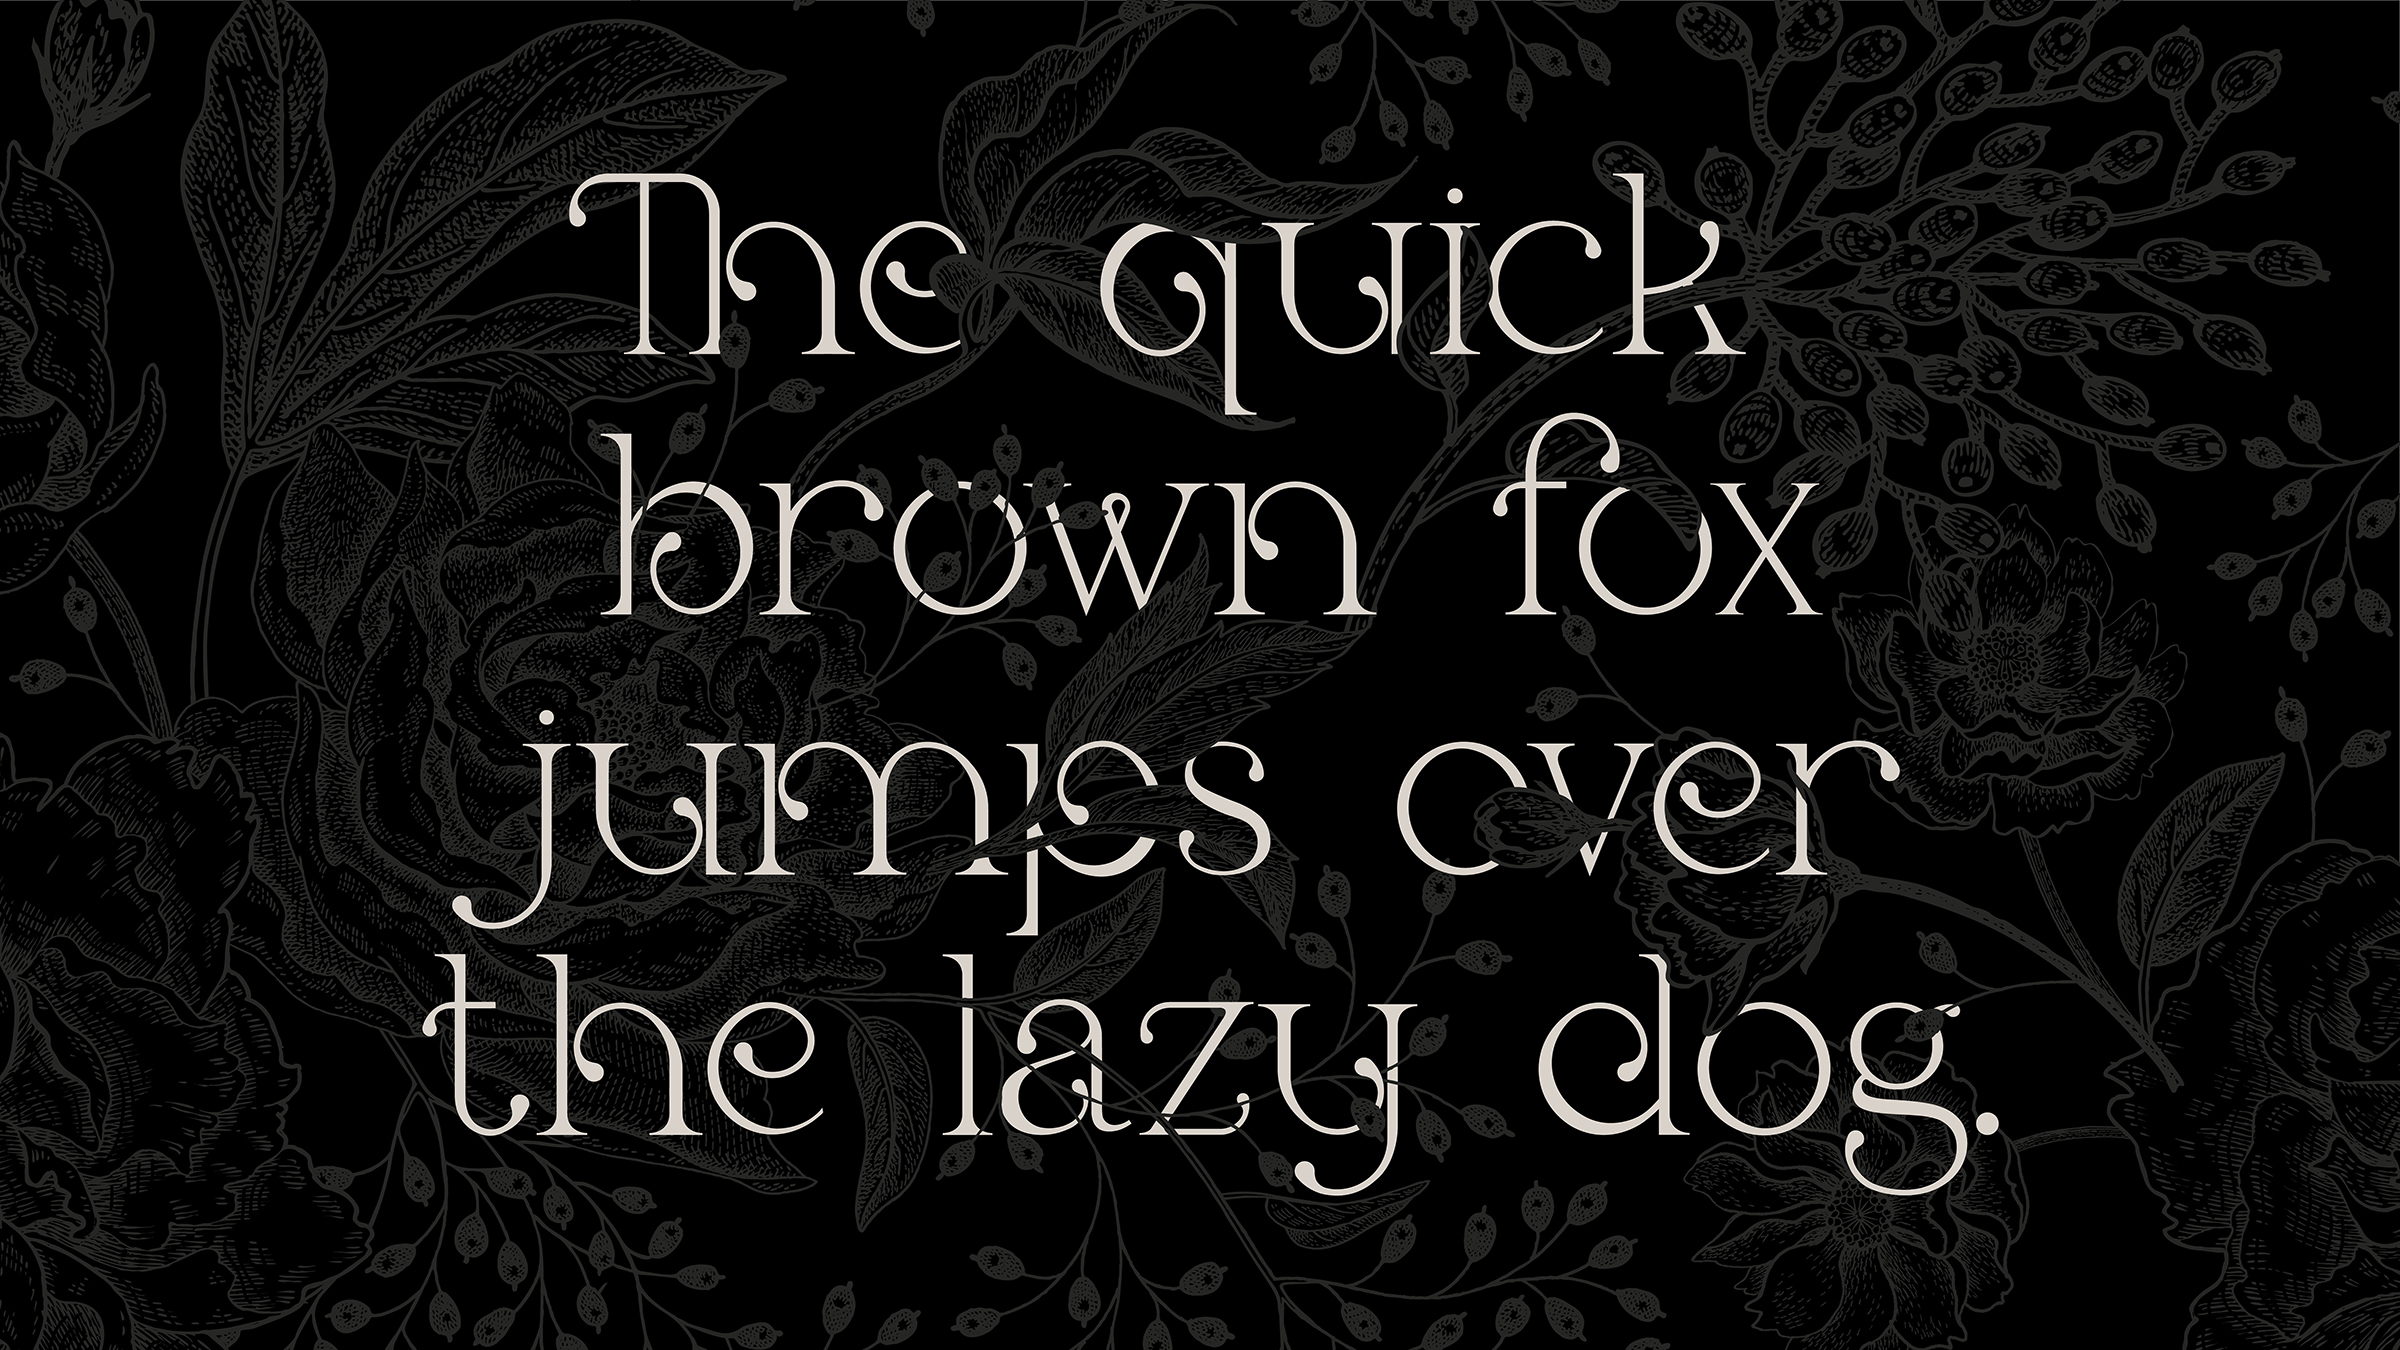 Madame_Bovary_Typeface_8